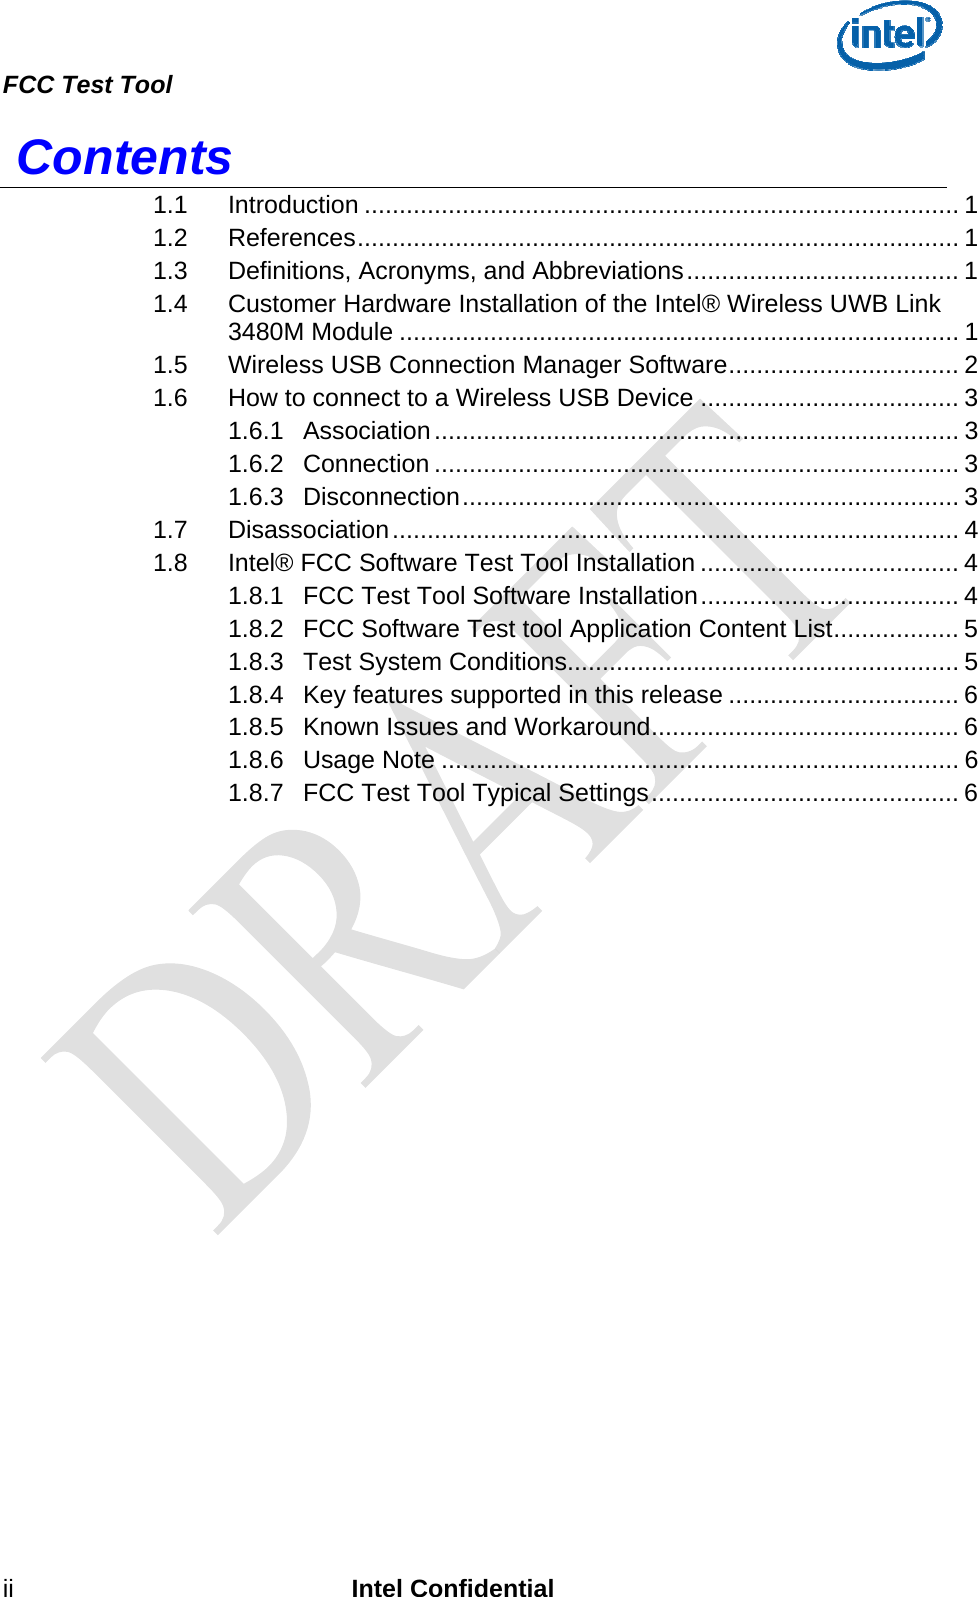  FCC Test Tool   ii Intel Confidential  Contents 1.1 Introduction ..................................................................................... 1 1.2 References...................................................................................... 1 1.3 Definitions, Acronyms, and Abbreviations....................................... 1 1.4 Customer Hardware Installation of the Intel® Wireless UWB Link 3480M Module ................................................................................ 1 1.5 Wireless USB Connection Manager Software................................. 2 1.6 How to connect to a Wireless USB Device ..................................... 3 1.6.1 Association........................................................................... 3 1.6.2 Connection ........................................................................... 3 1.6.3 Disconnection....................................................................... 3 1.7 Disassociation................................................................................. 4 1.8 Intel® FCC Software Test Tool Installation ..................................... 4 1.8.1 FCC Test Tool Software Installation..................................... 4 1.8.2 FCC Software Test tool Application Content List.................. 5 1.8.3 Test System Conditions........................................................ 5 1.8.4 Key features supported in this release ................................. 6 1.8.5 Known Issues and Workaround............................................ 6 1.8.6 Usage Note .......................................................................... 6 1.8.7 FCC Test Tool Typical Settings............................................ 6  